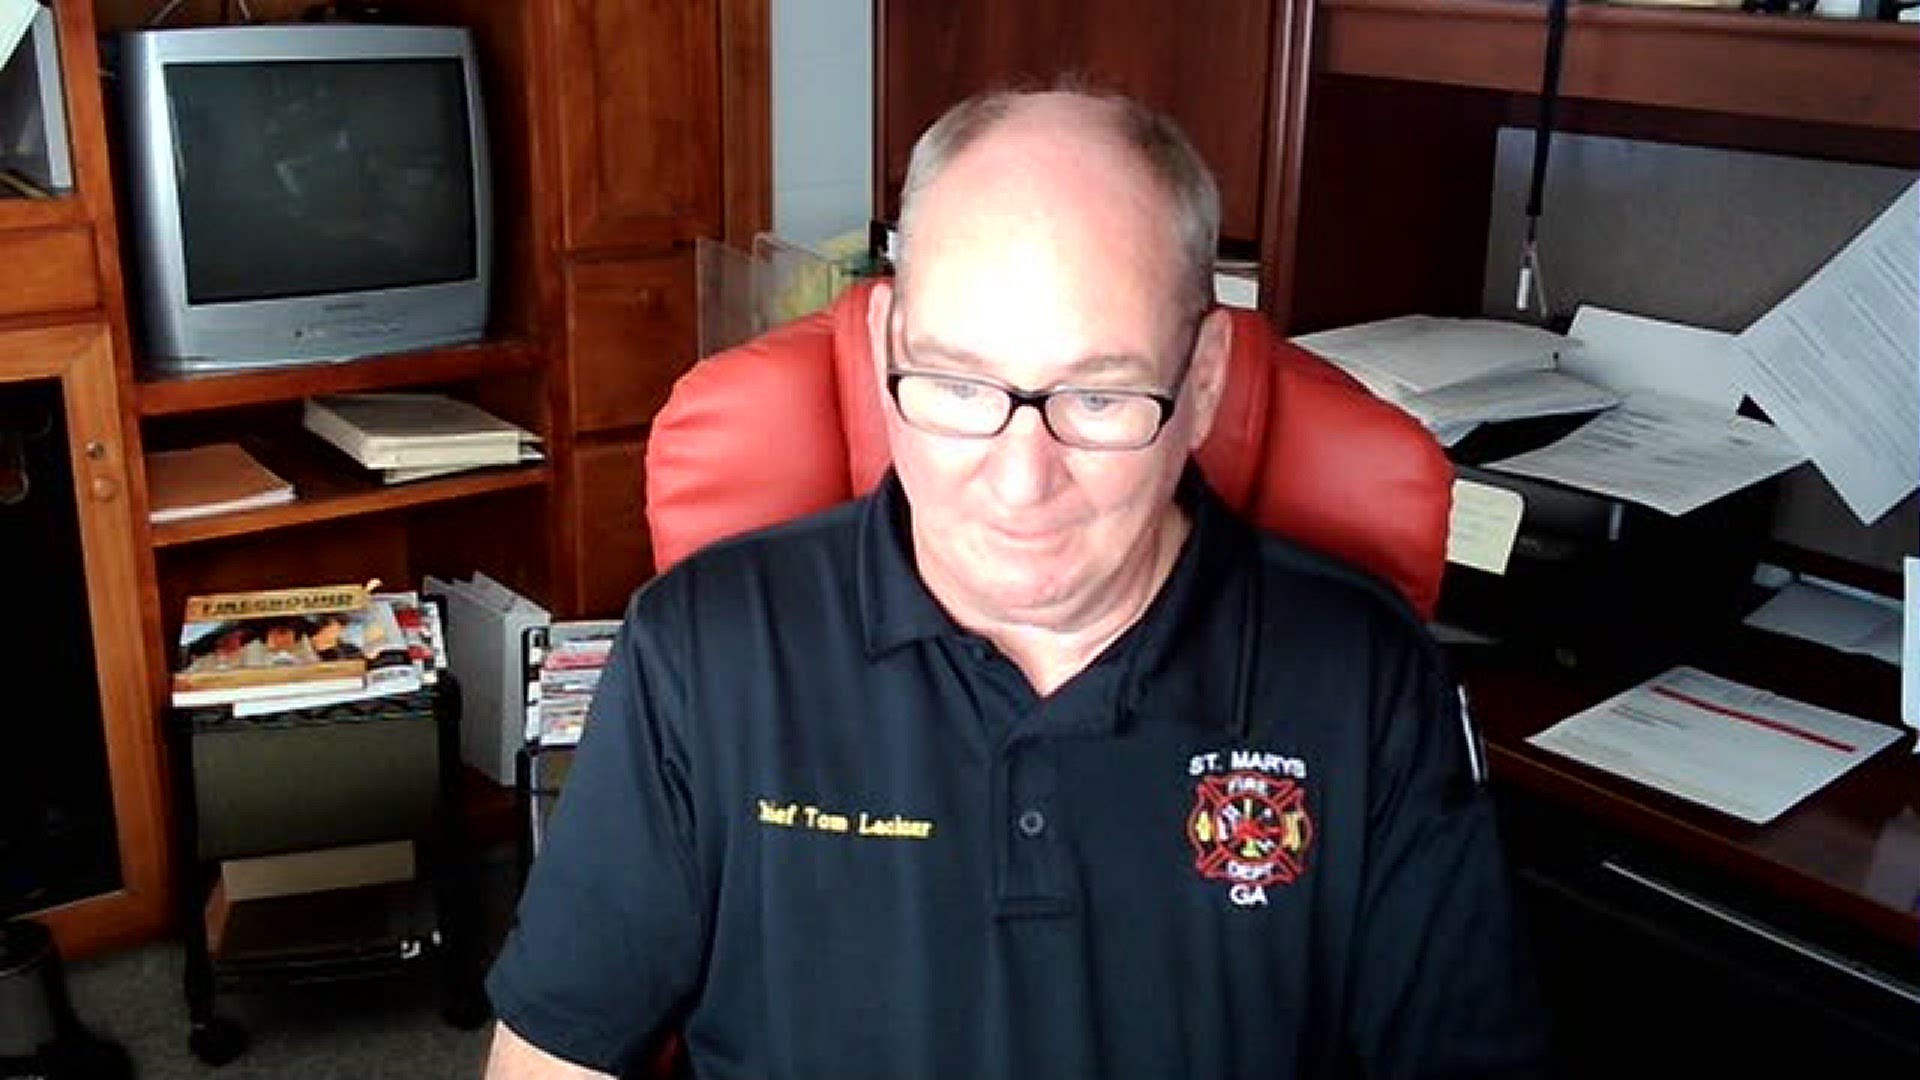 First Coast News spoke to St. Marys Fire Department Chief Tom Lackner, who described Medina as "young and eager."